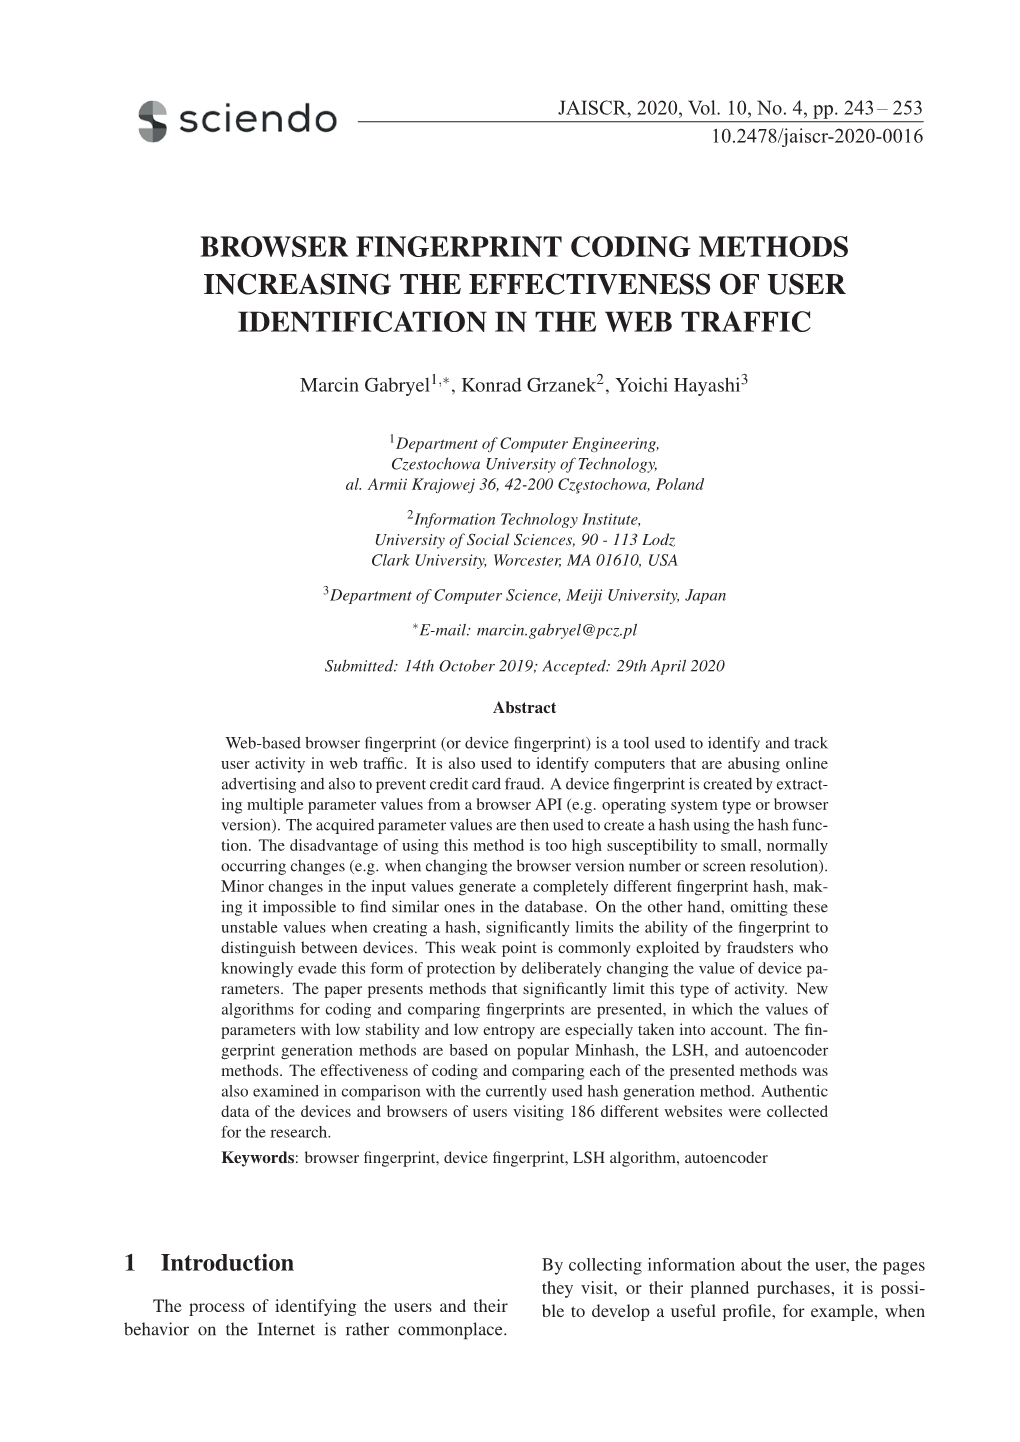 Browser Fingerprint Coding Methods Increasing the Effectiveness of User Identification in the Web Traffic